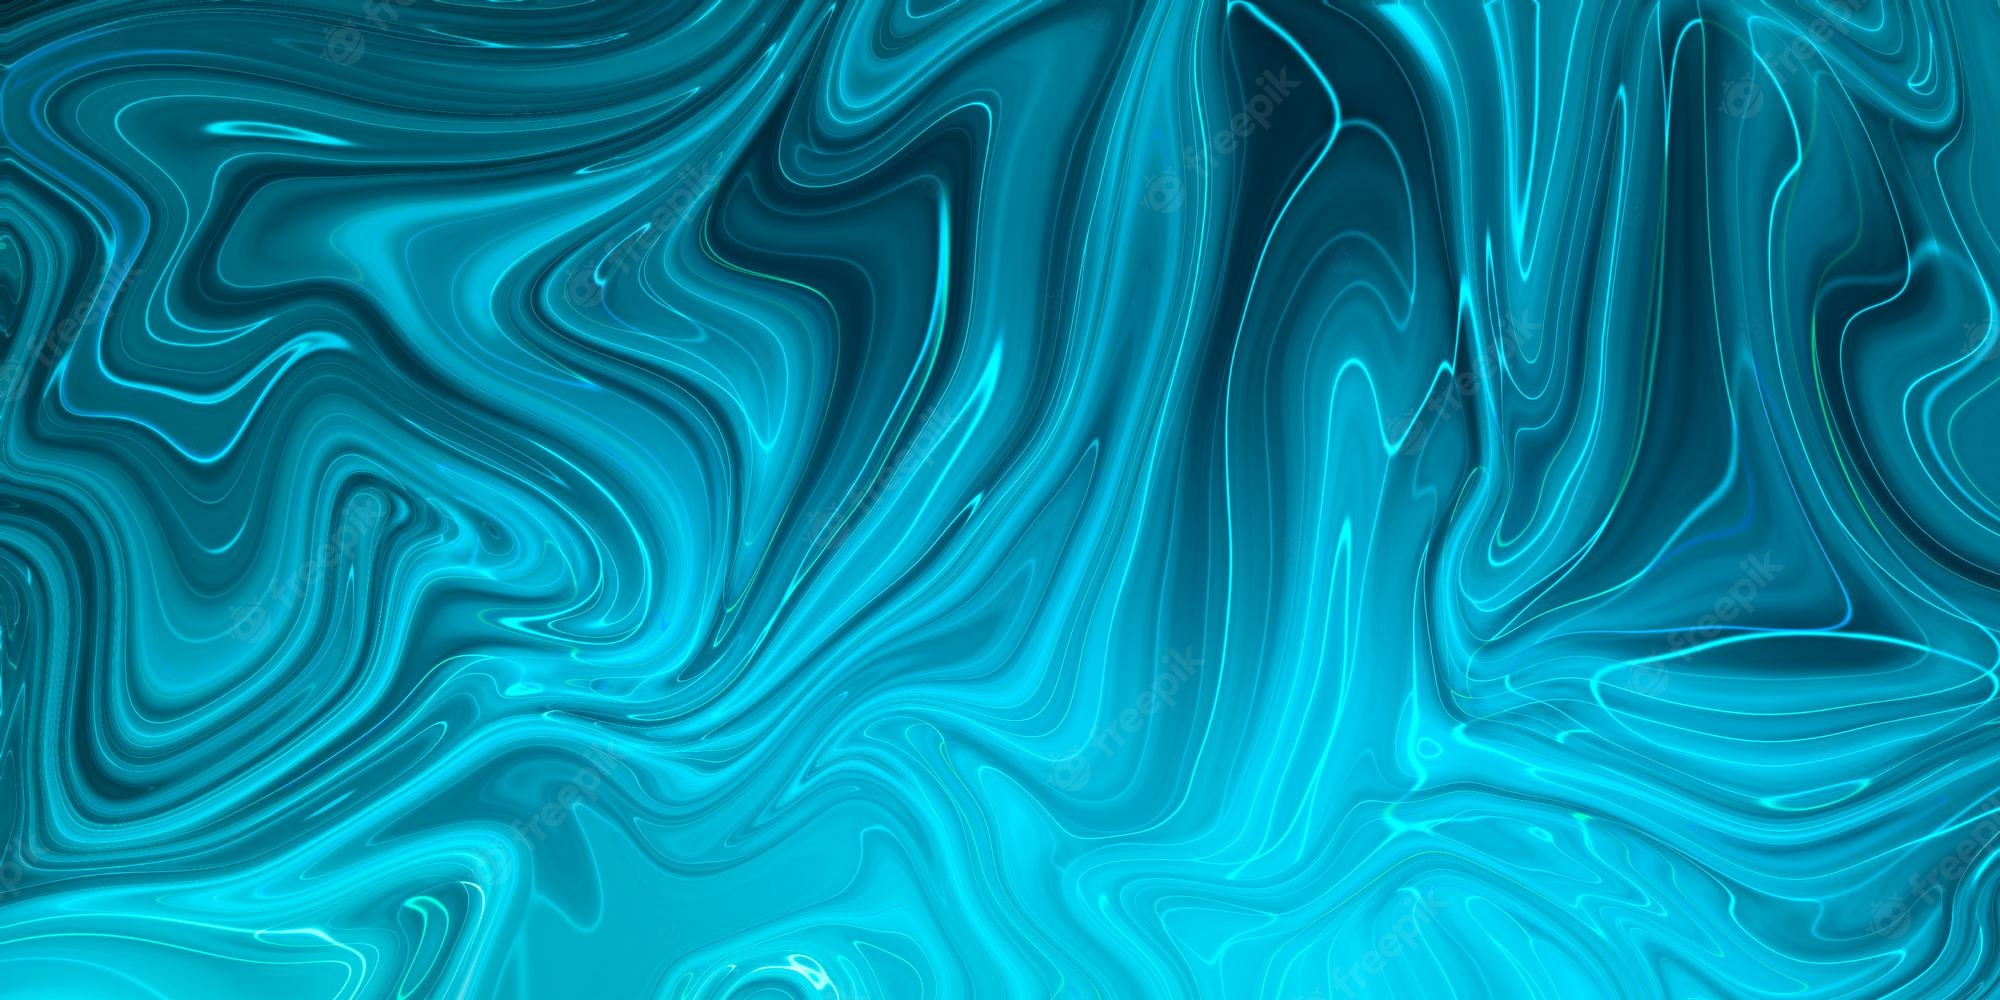 Blue And Pink Liquefied Swirls Wallpapers